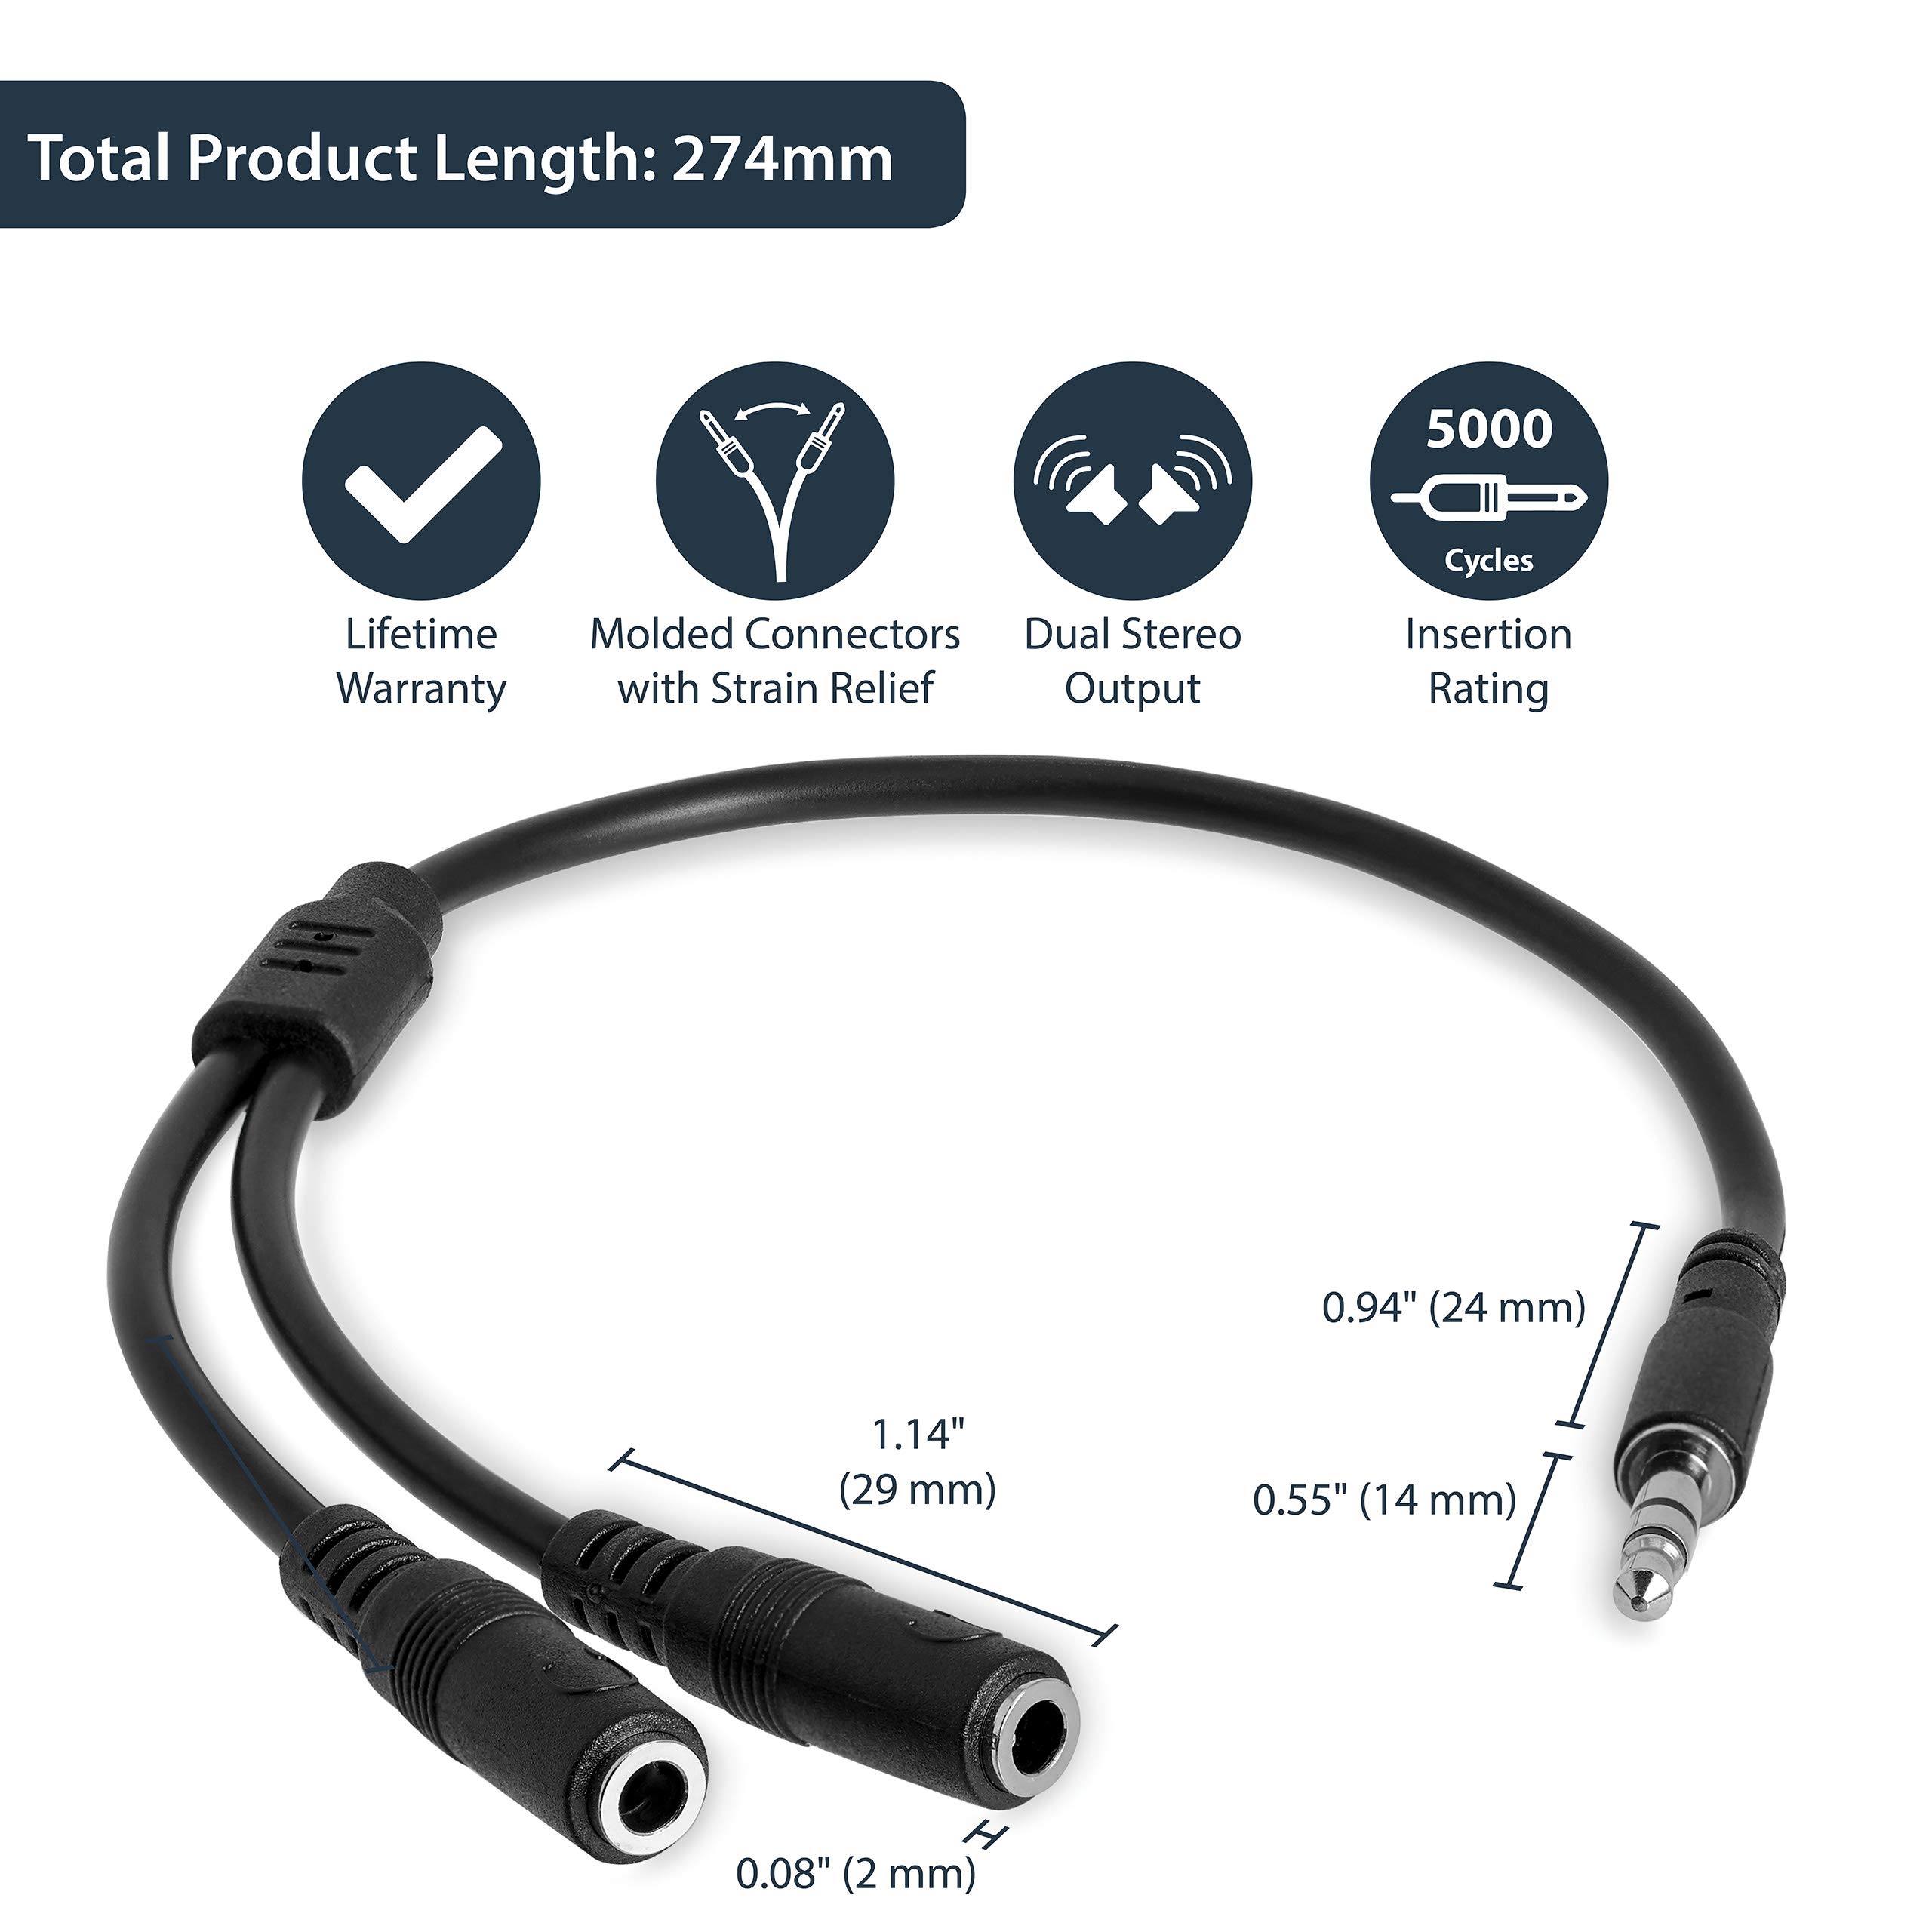 StarTech.com 3.5mm Audio Extension Cable - Slim Audio Splitter Y Cable and Headphone Extender - Male to 2x Female AUX Cable (MUY1MFFS)